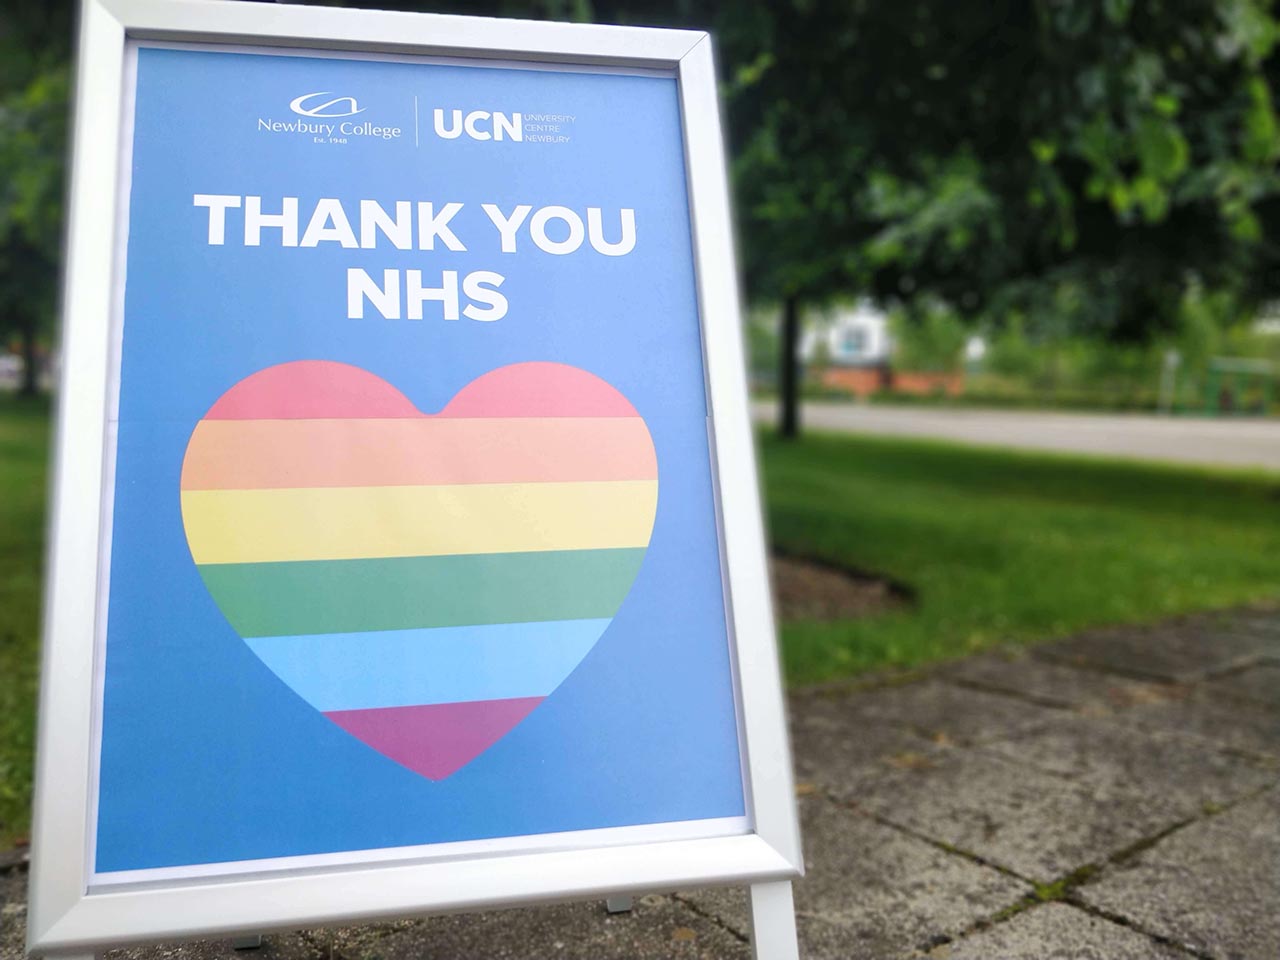 Thank you NHS sign